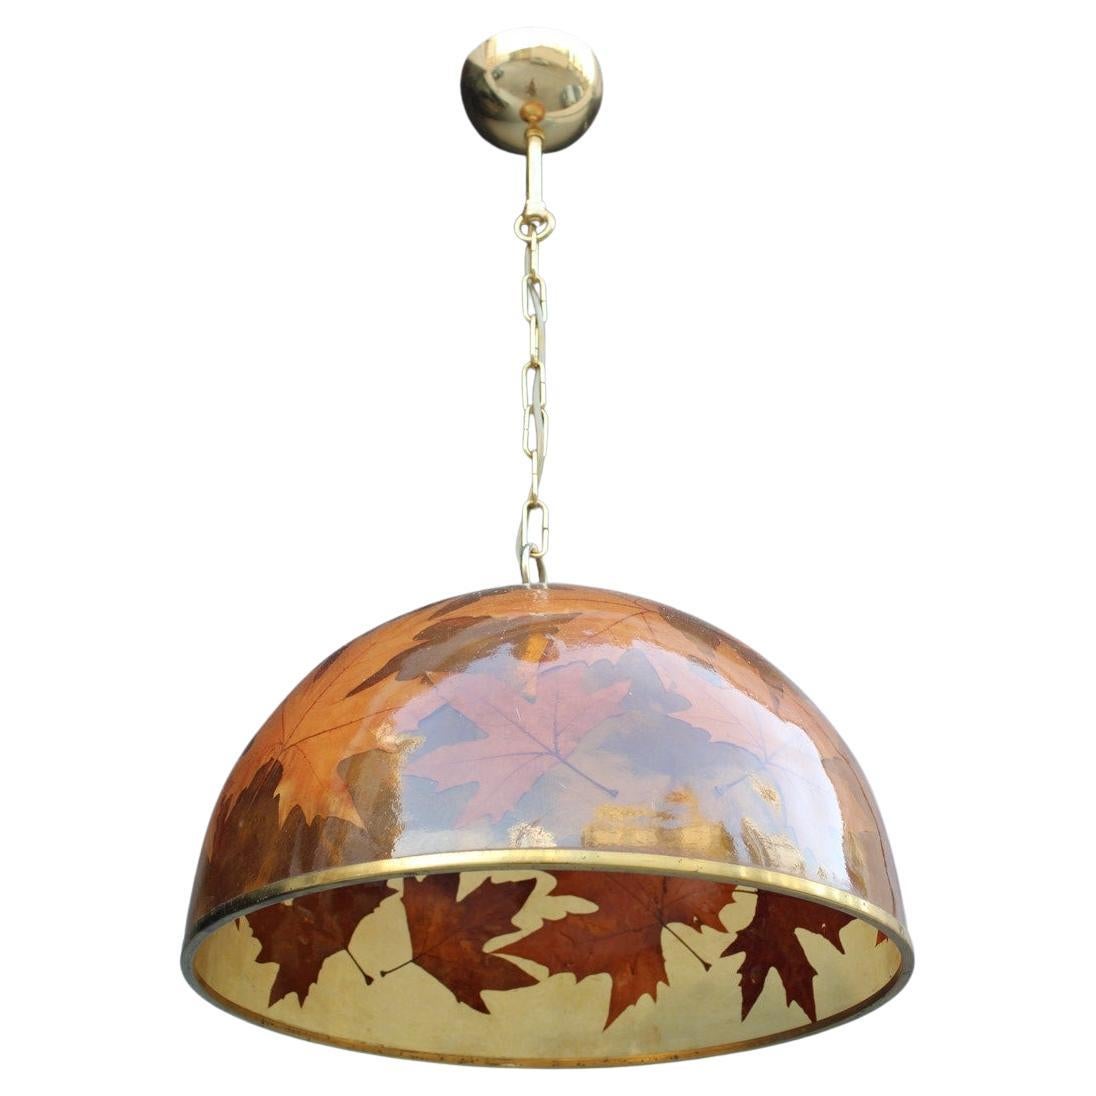 Italian Dome Chandelier in Resin with Plane Leaves Design 1970 Brass For Sale